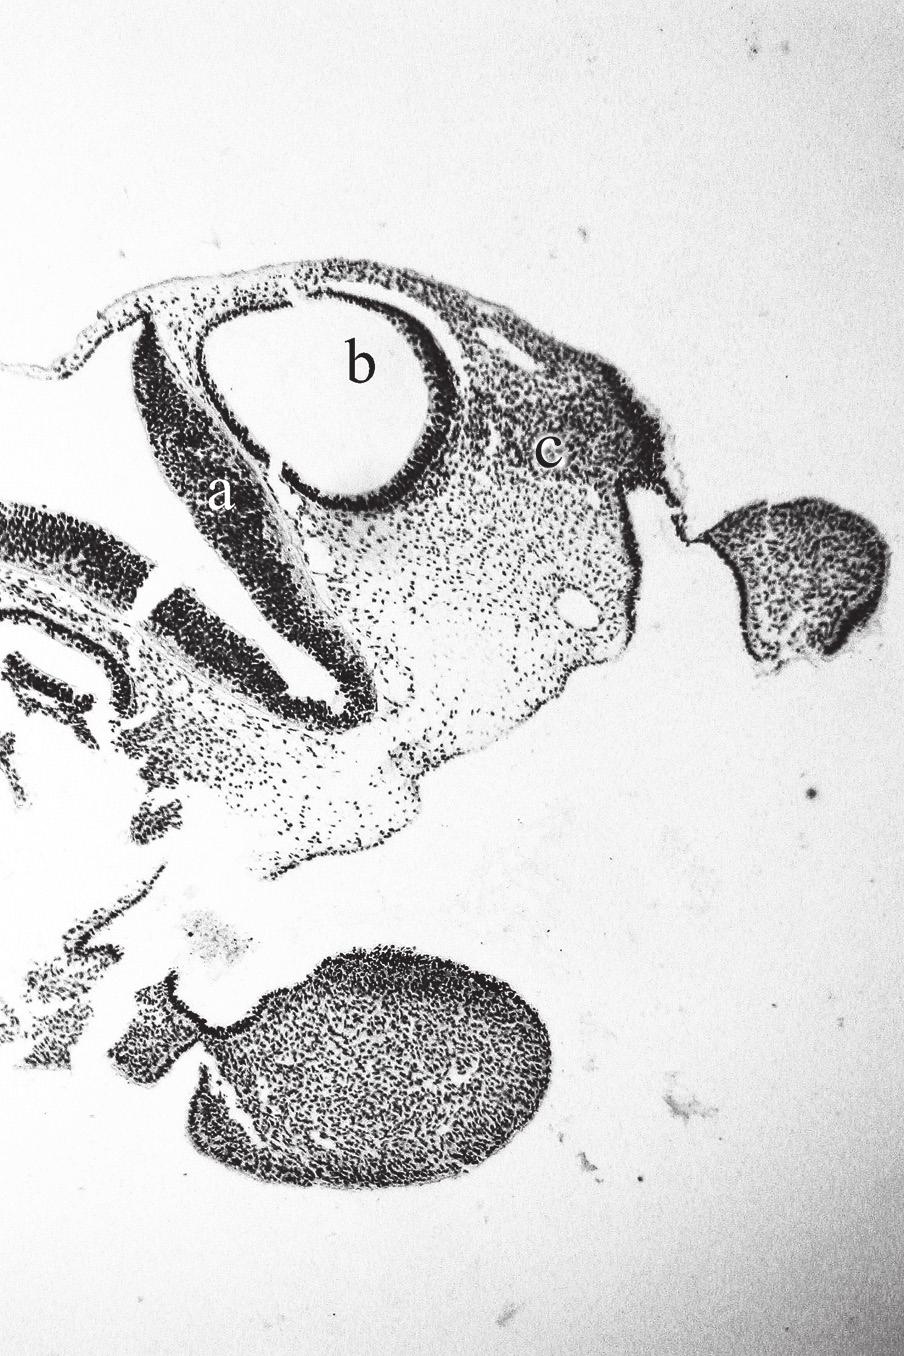 A. Bruska et al., Human facial-vestibulocochlear complex Figure 4. Horizontal section of head in embryo at stage 13.